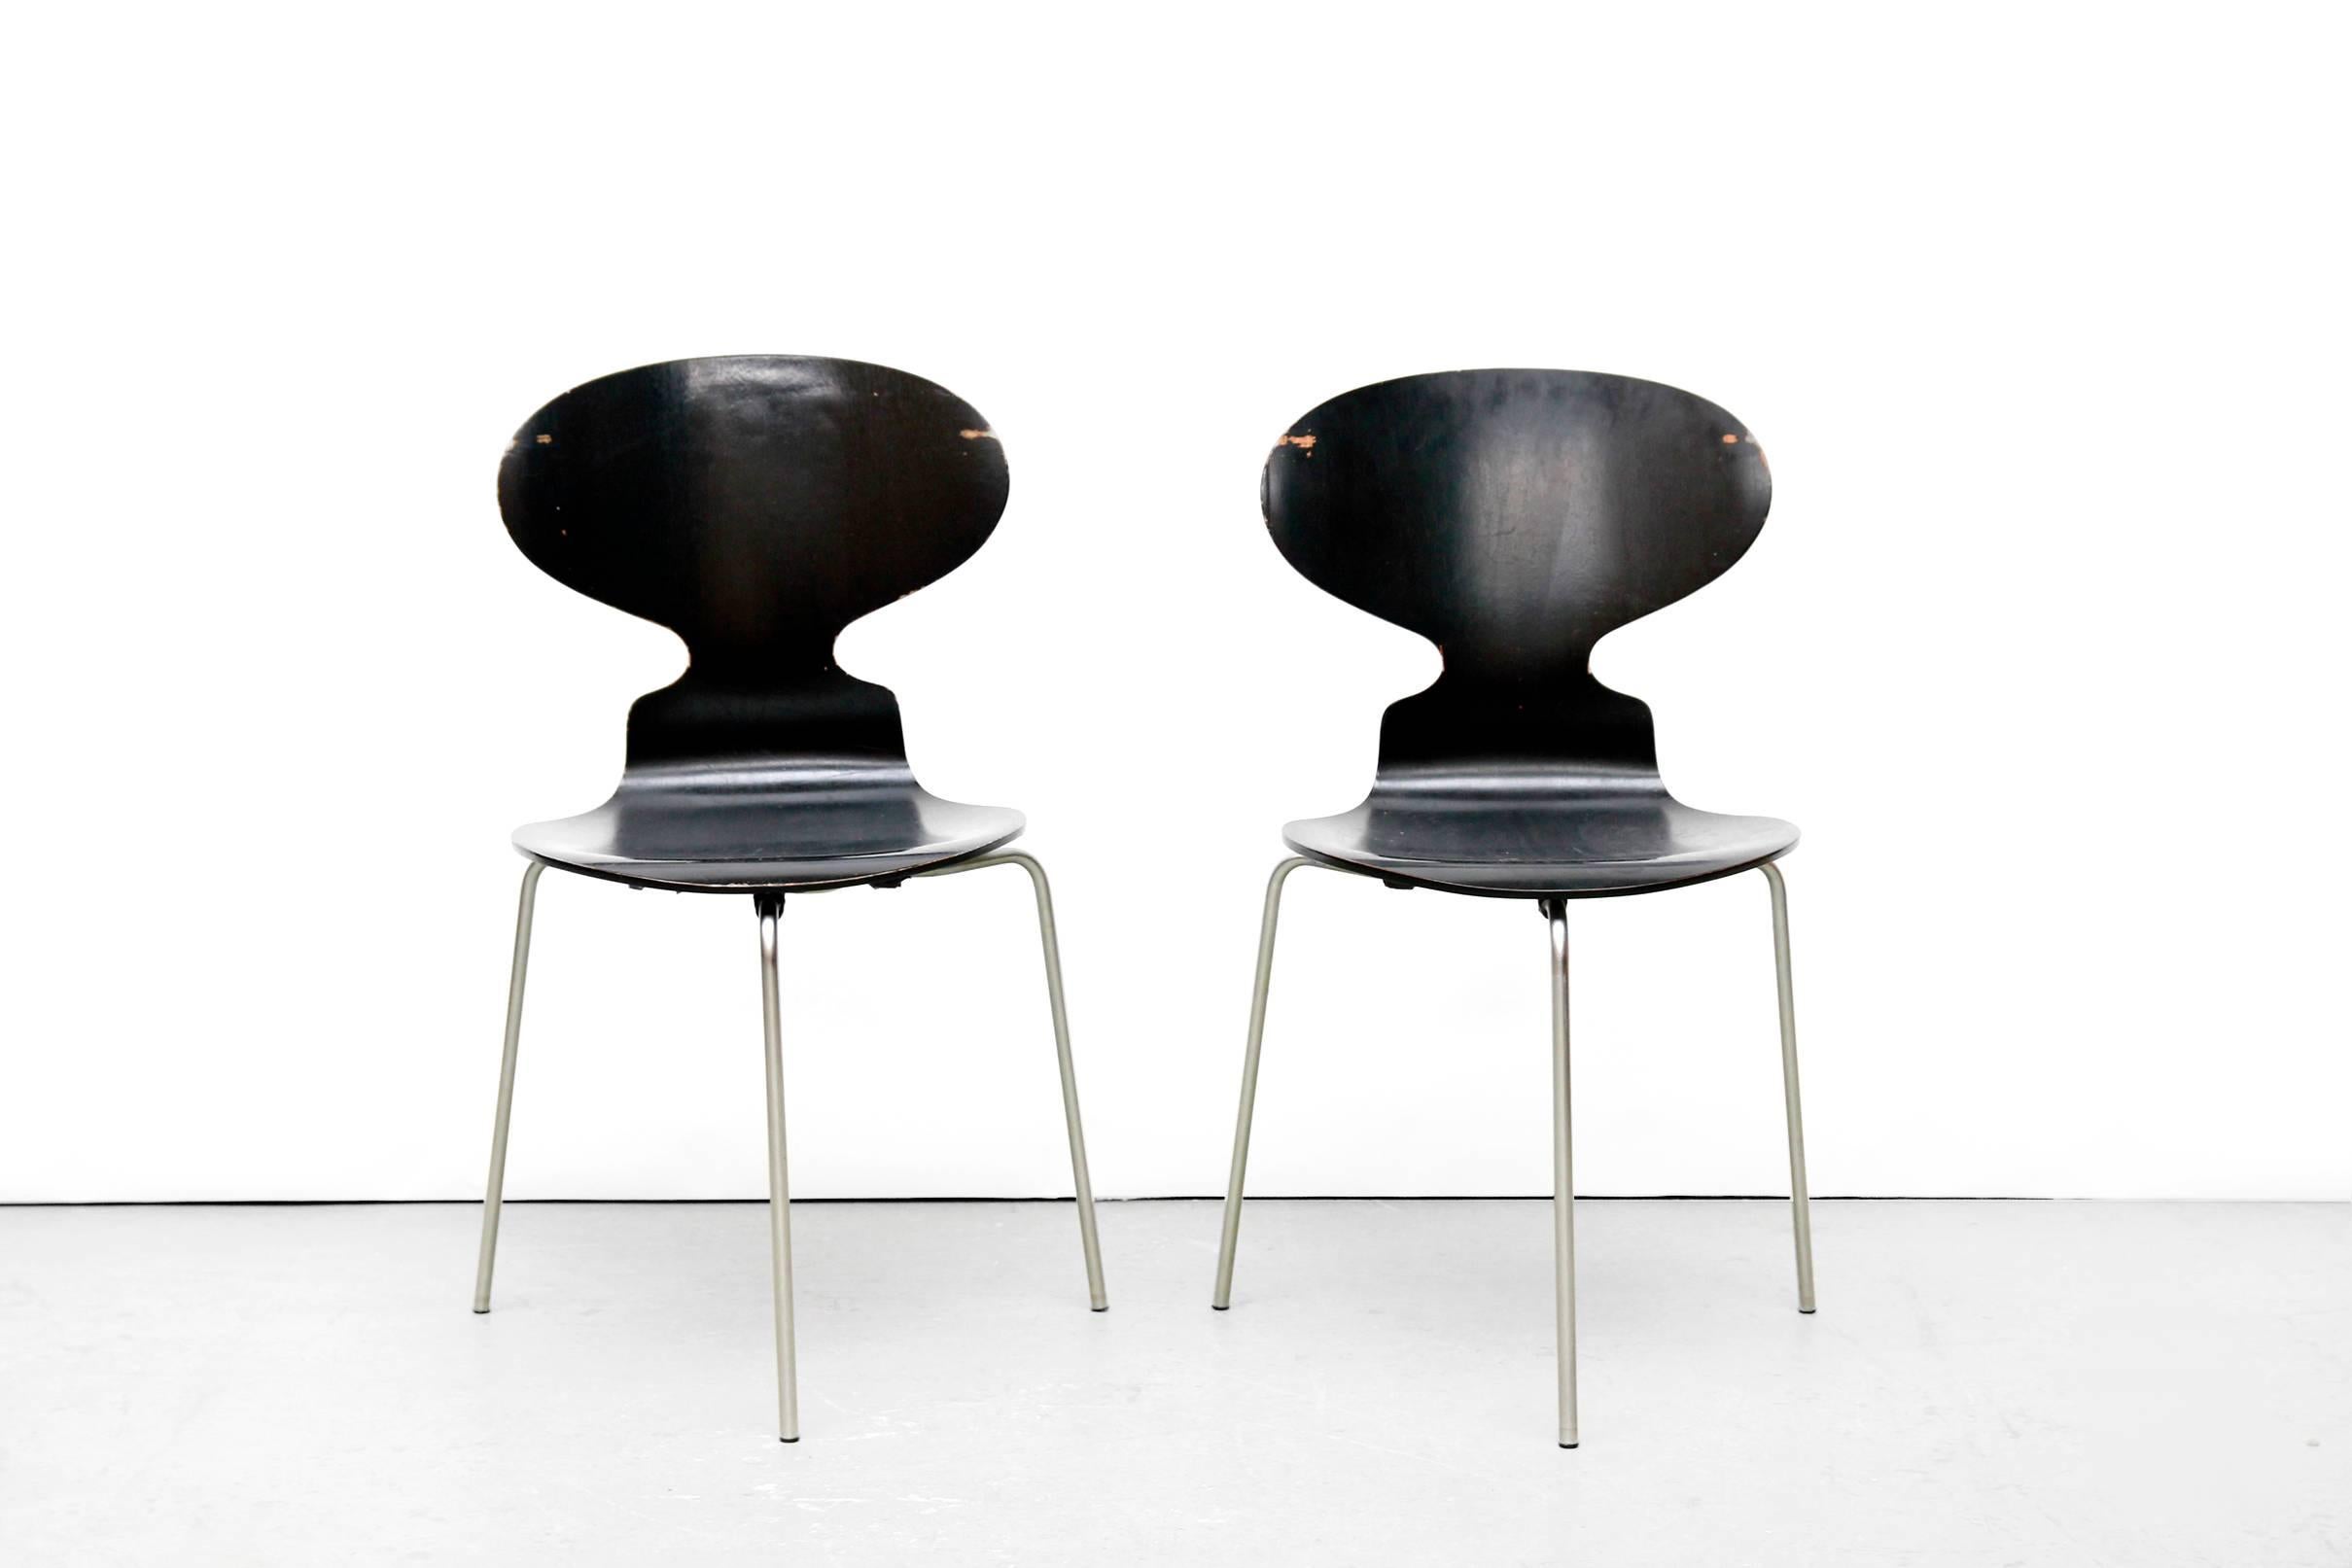 This set of six chairs was designed by Arne Jacobsen and manufactured by Fritz Hansen, Denmark in 1969. 
The official name of the chairs is Model number 3100, but they are also called The Ant because of their shape. The chairs are made from